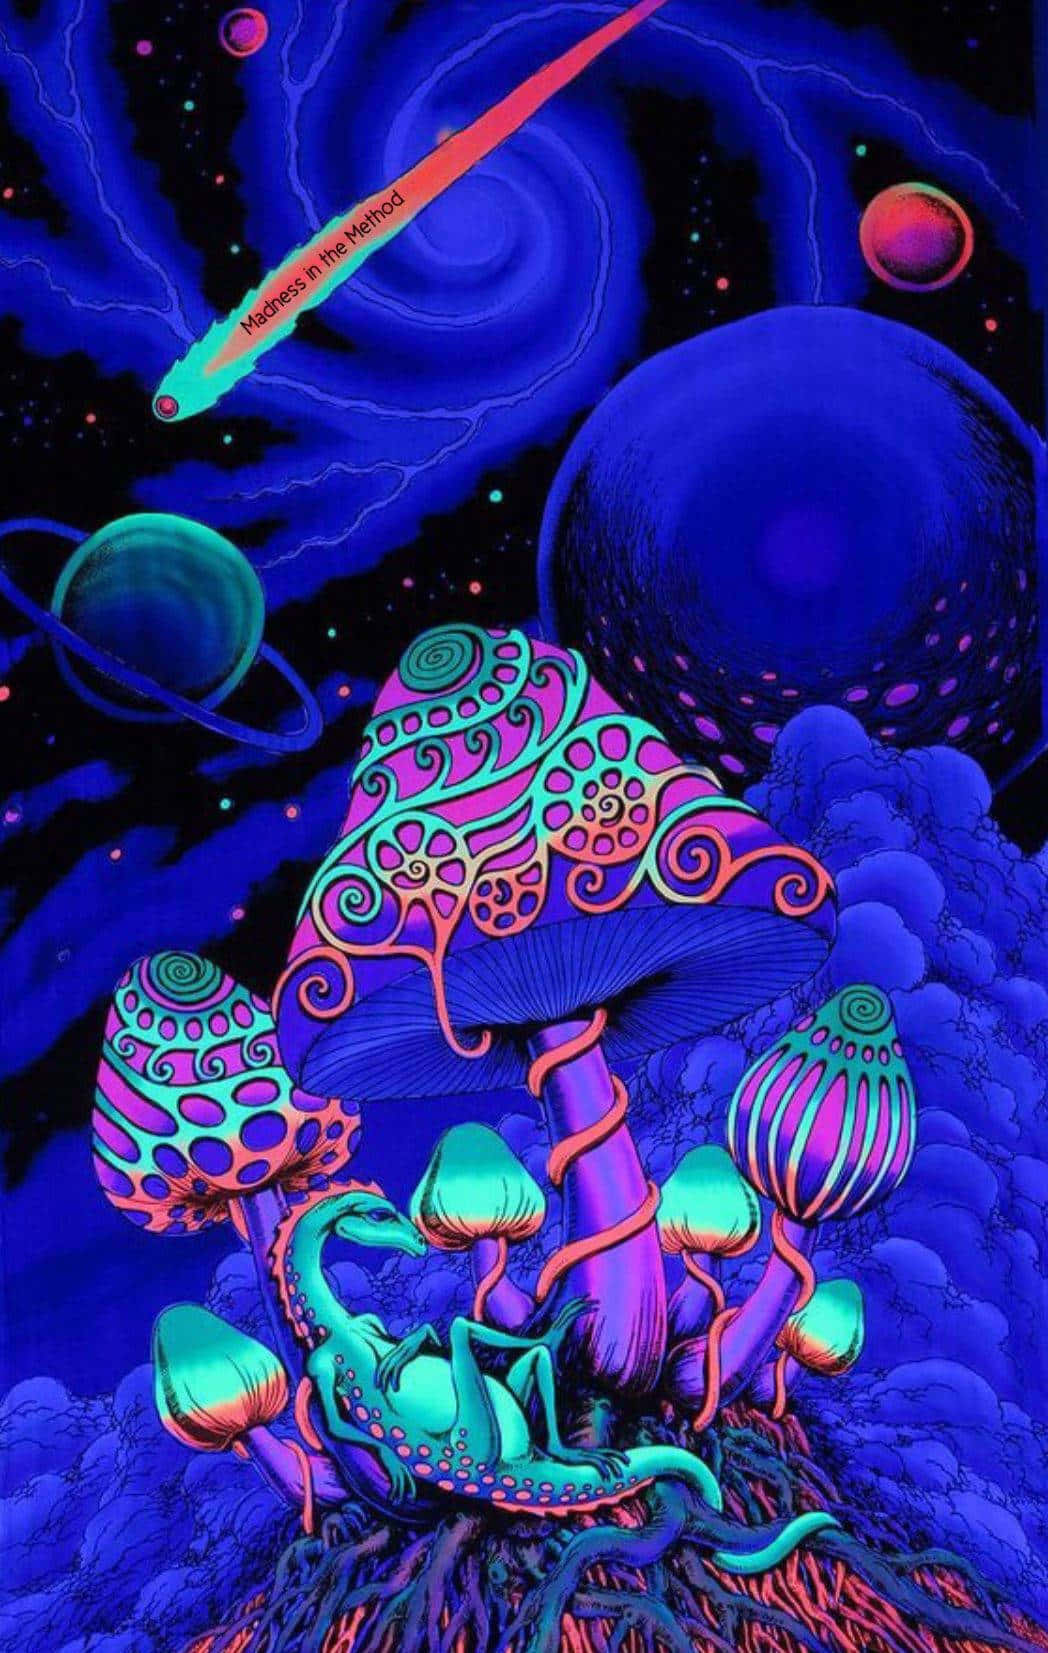 “Take the Trip - Explore the Colours of the Trippy Mushroom” Wallpaper